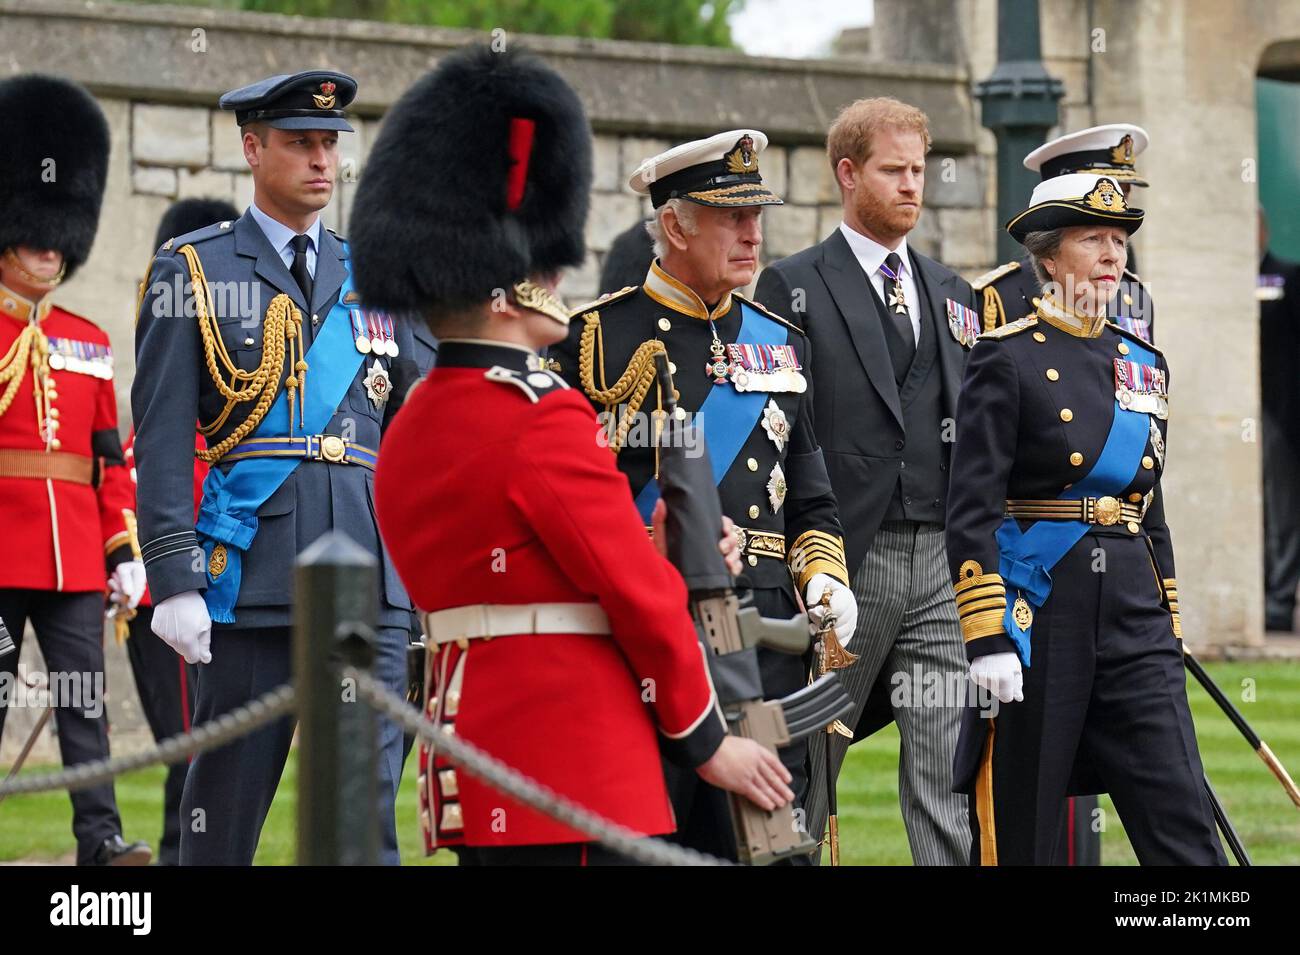 (left to right) The Prince of Wales, the Duke of Sussex, King Charles III, the Princess Royal follow the State Hearse carrying the coffin of Queen Elizabeth II, draped in the Royal Standard with the Imperial State Crown and the Sovereign's Orb and Sceptre, as it arrives at the Committal Service held at St George's Chapel in Windsor Castle, Berkshire. Picture date: Monday September 19, 2022. Stock Photo